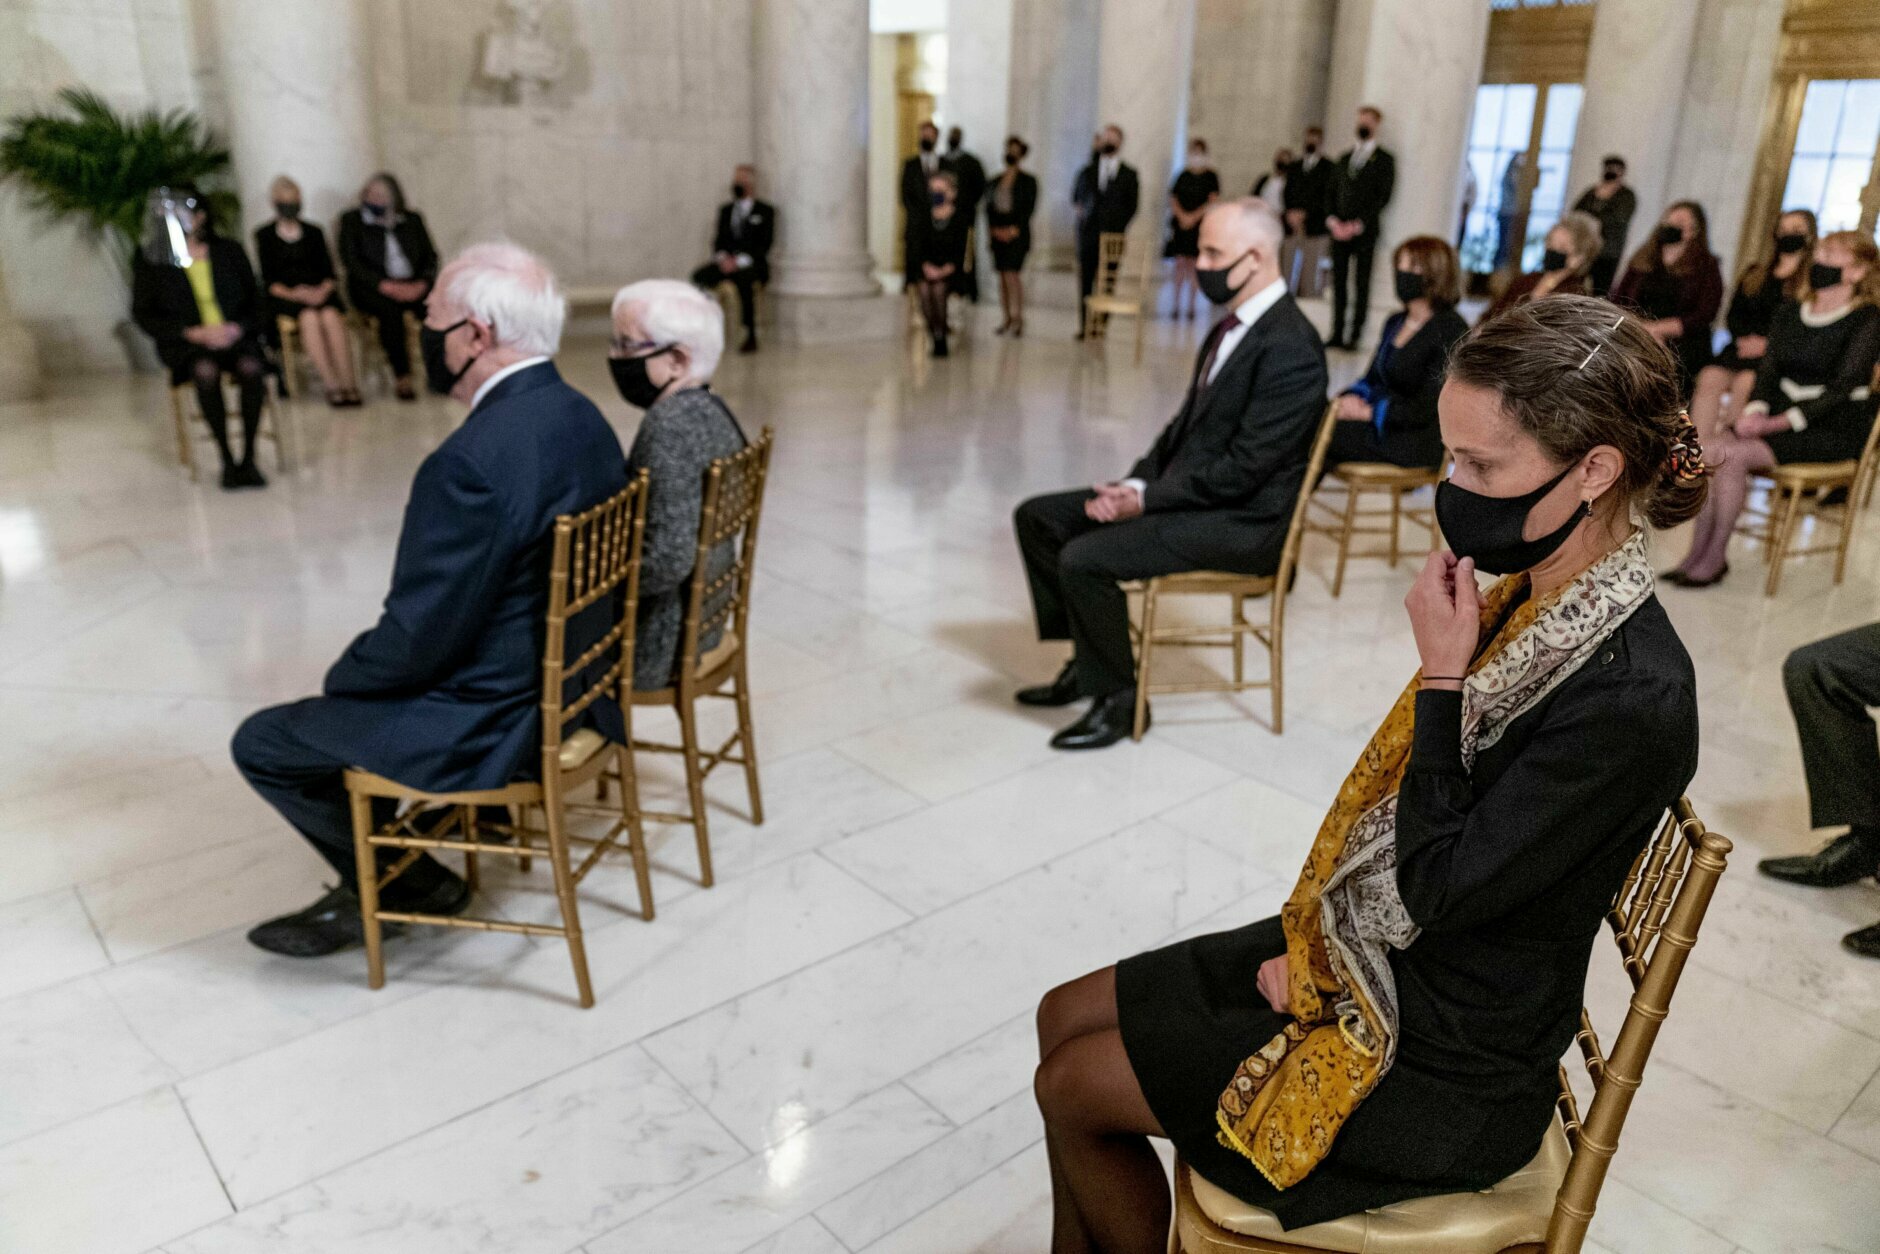 Invited guests attend a private ceremony for Justice Ruth Bader Ginsburg at the Supreme Court in Washington, Wednesday, Sept. 23, 2020. Ginsburg, 87, died of cancer on Sept. 18. (AP Photo/Andrew Harnik, Pool)